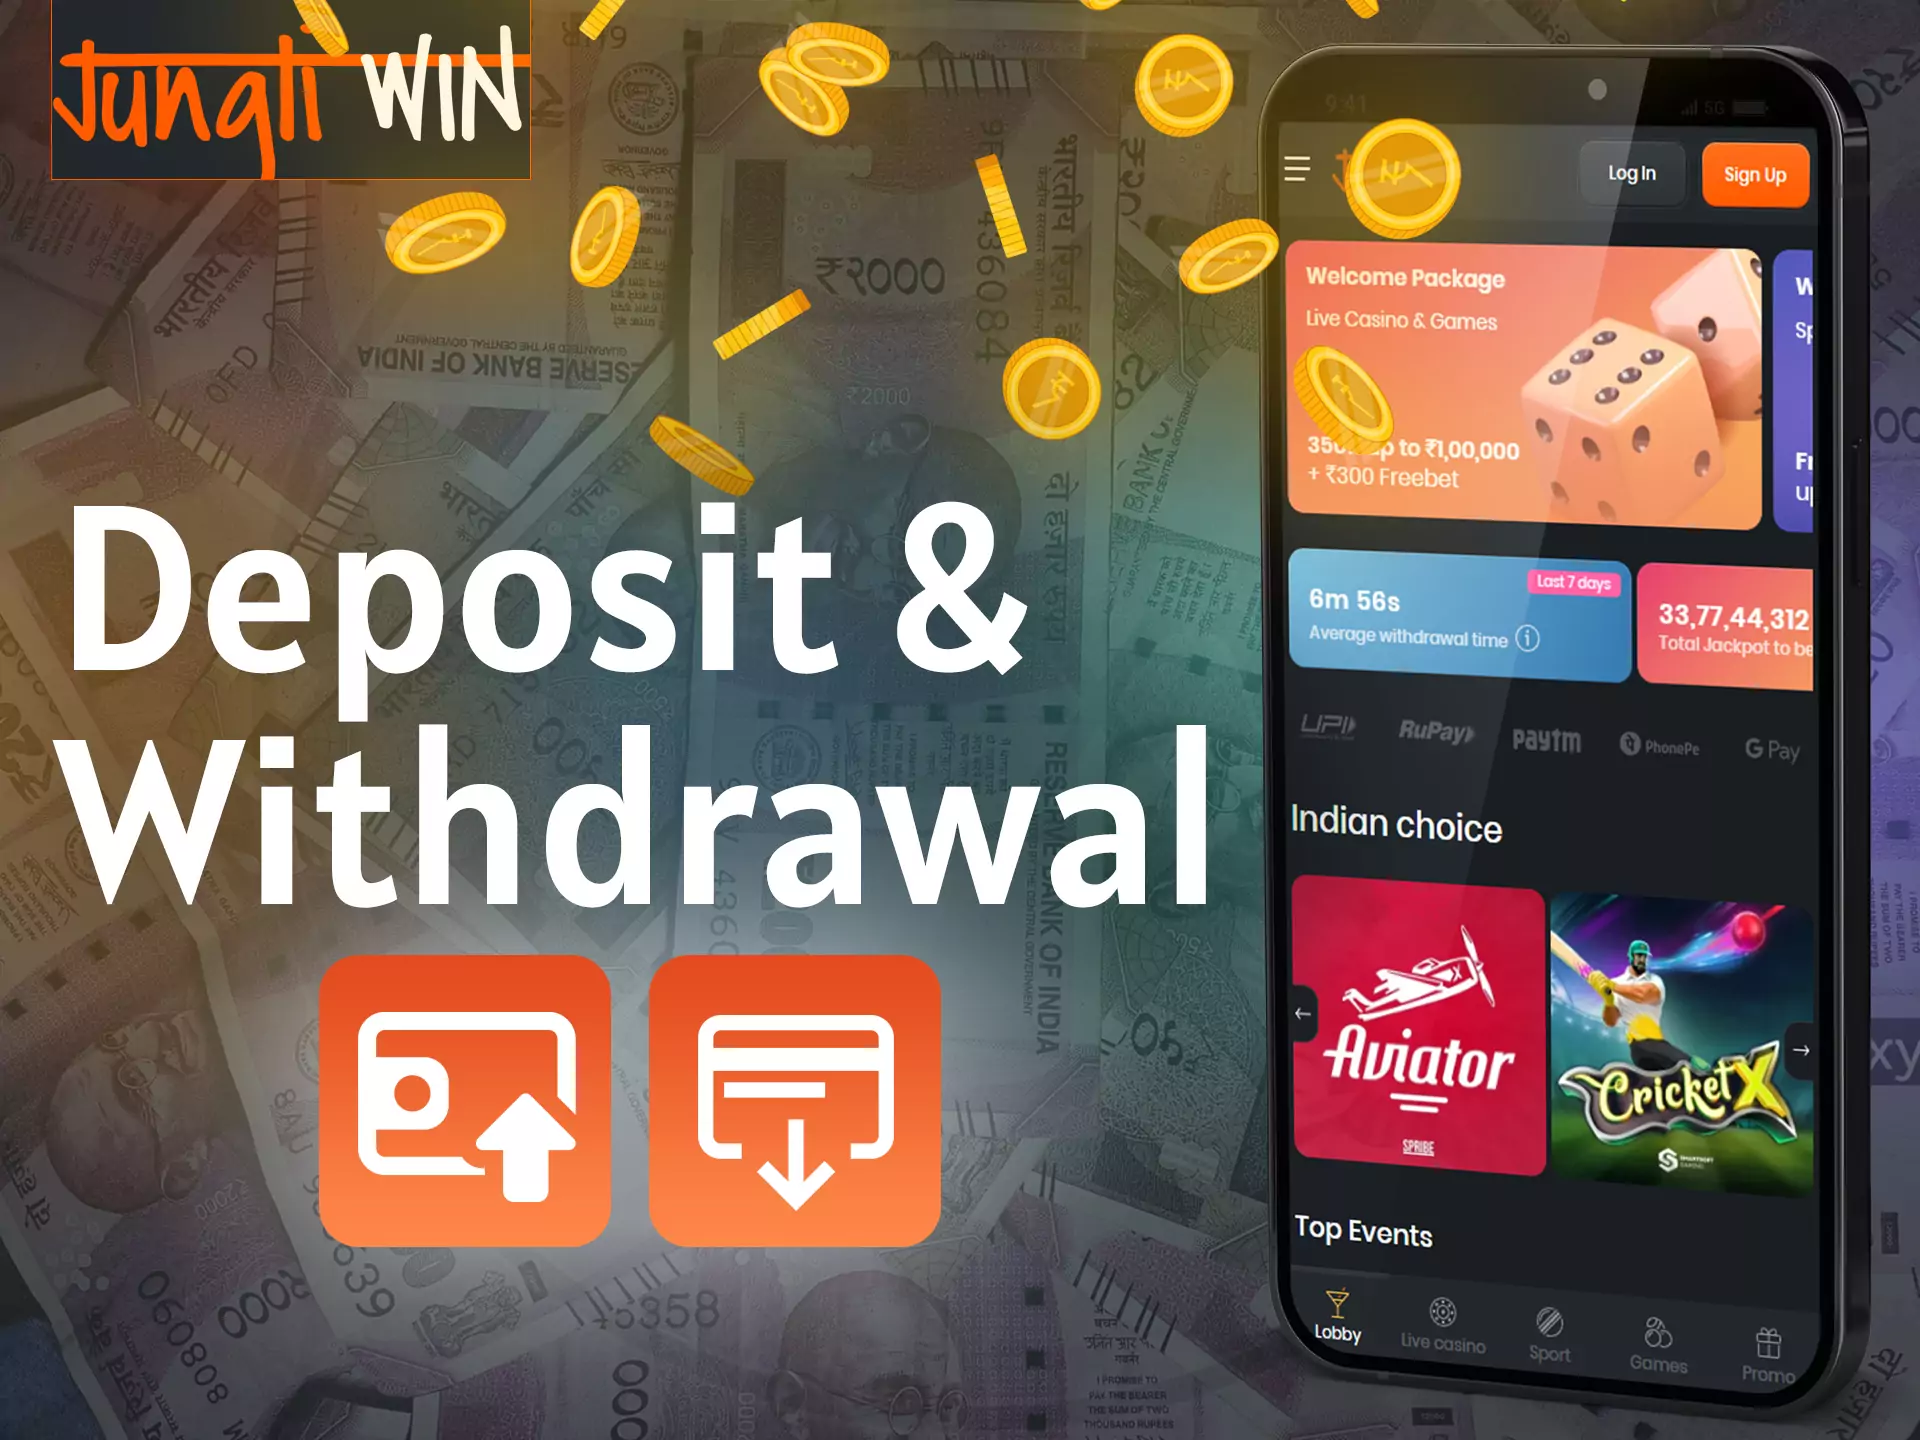 With this instruction, learn how to deposit your balance and withdraw money from your Jungliwin account.